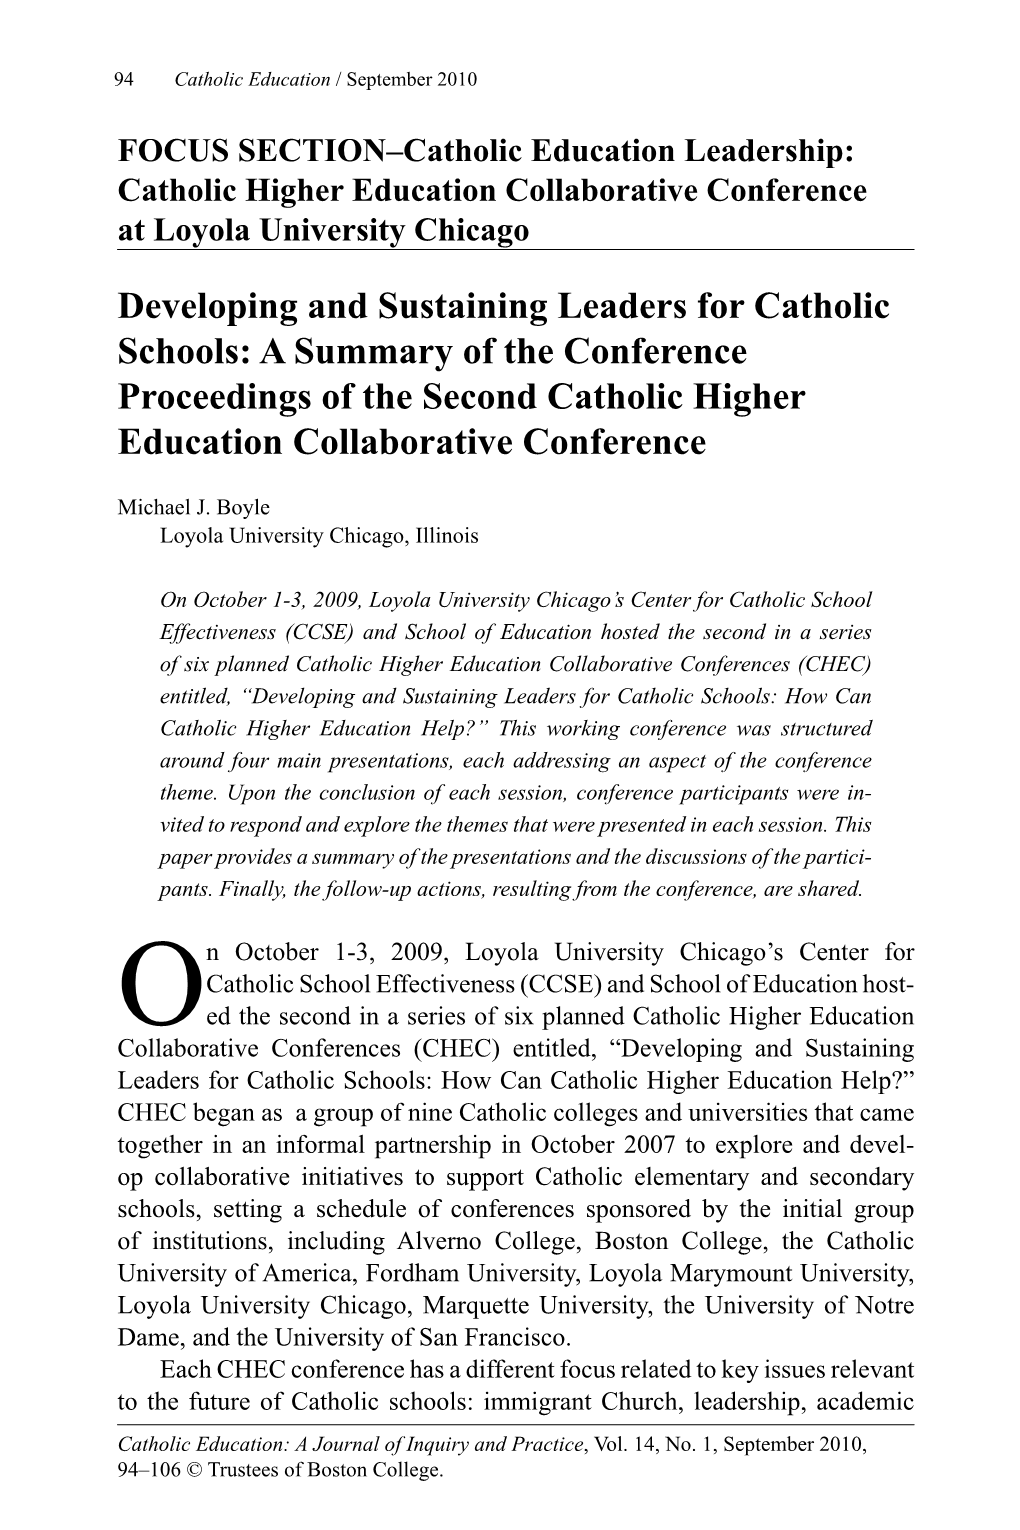 Developing and Sustaining Leaders for Catholic Schools: a Summary of the Conference Proceedings of the Second Catholic Higher Education Collaborative Conference